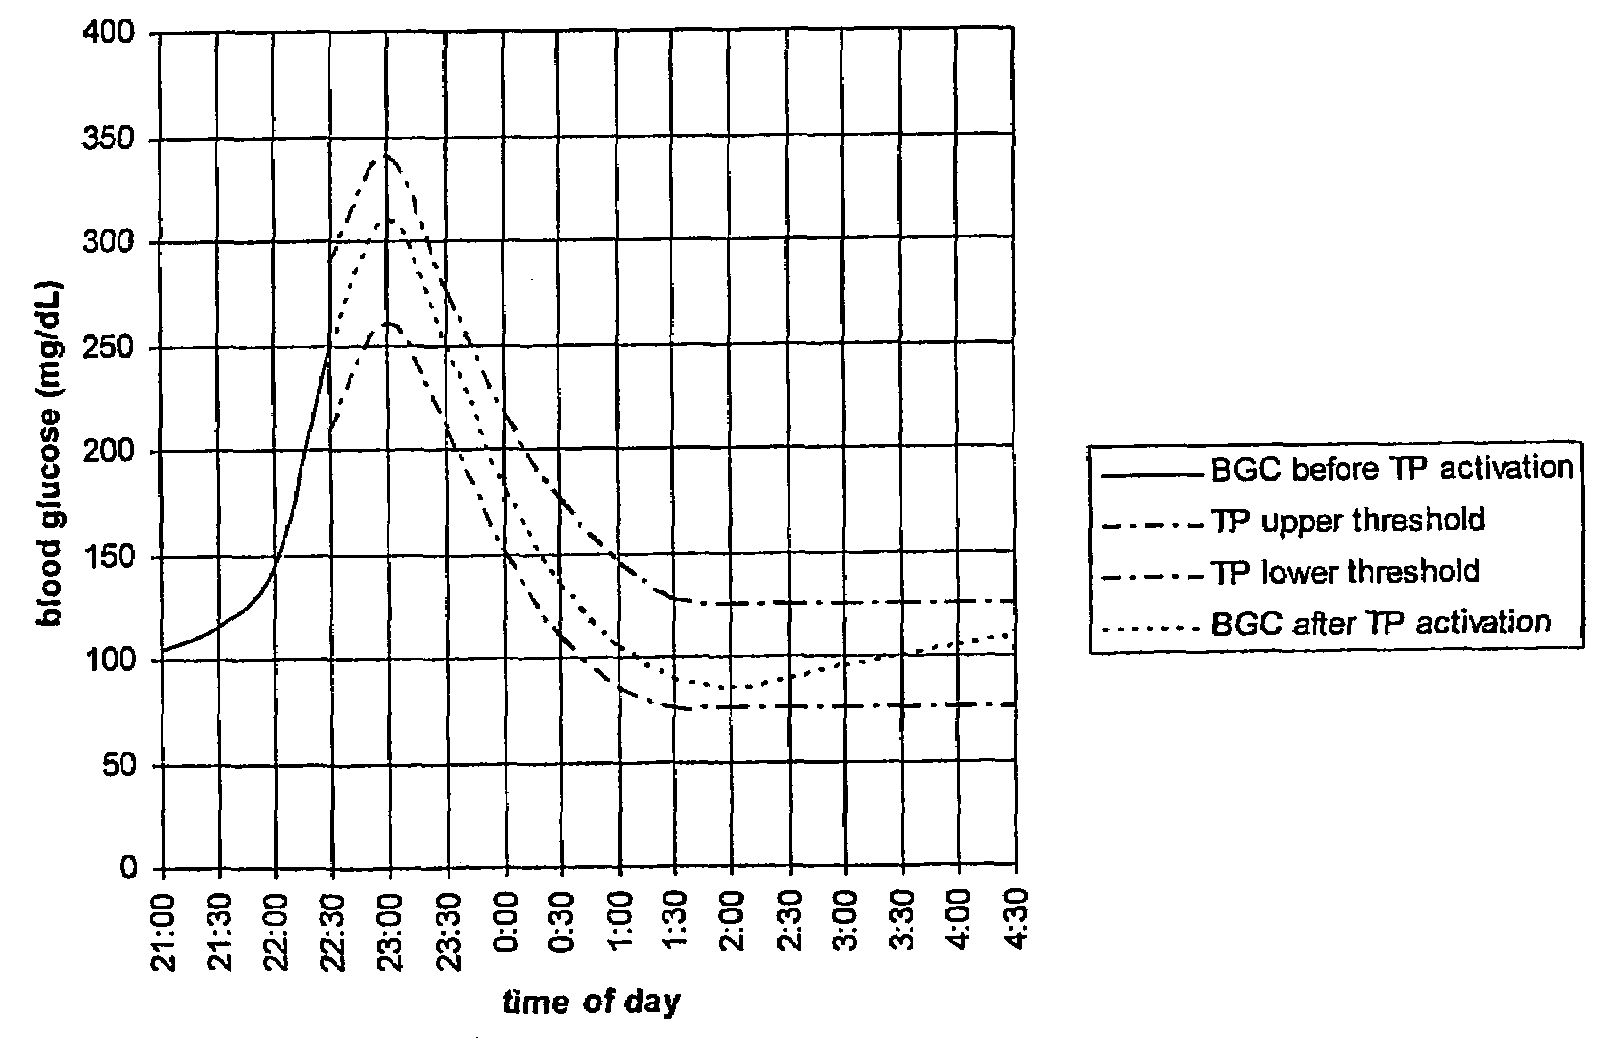 Fluctuating blood glucose notification threshold profiles and methods of use